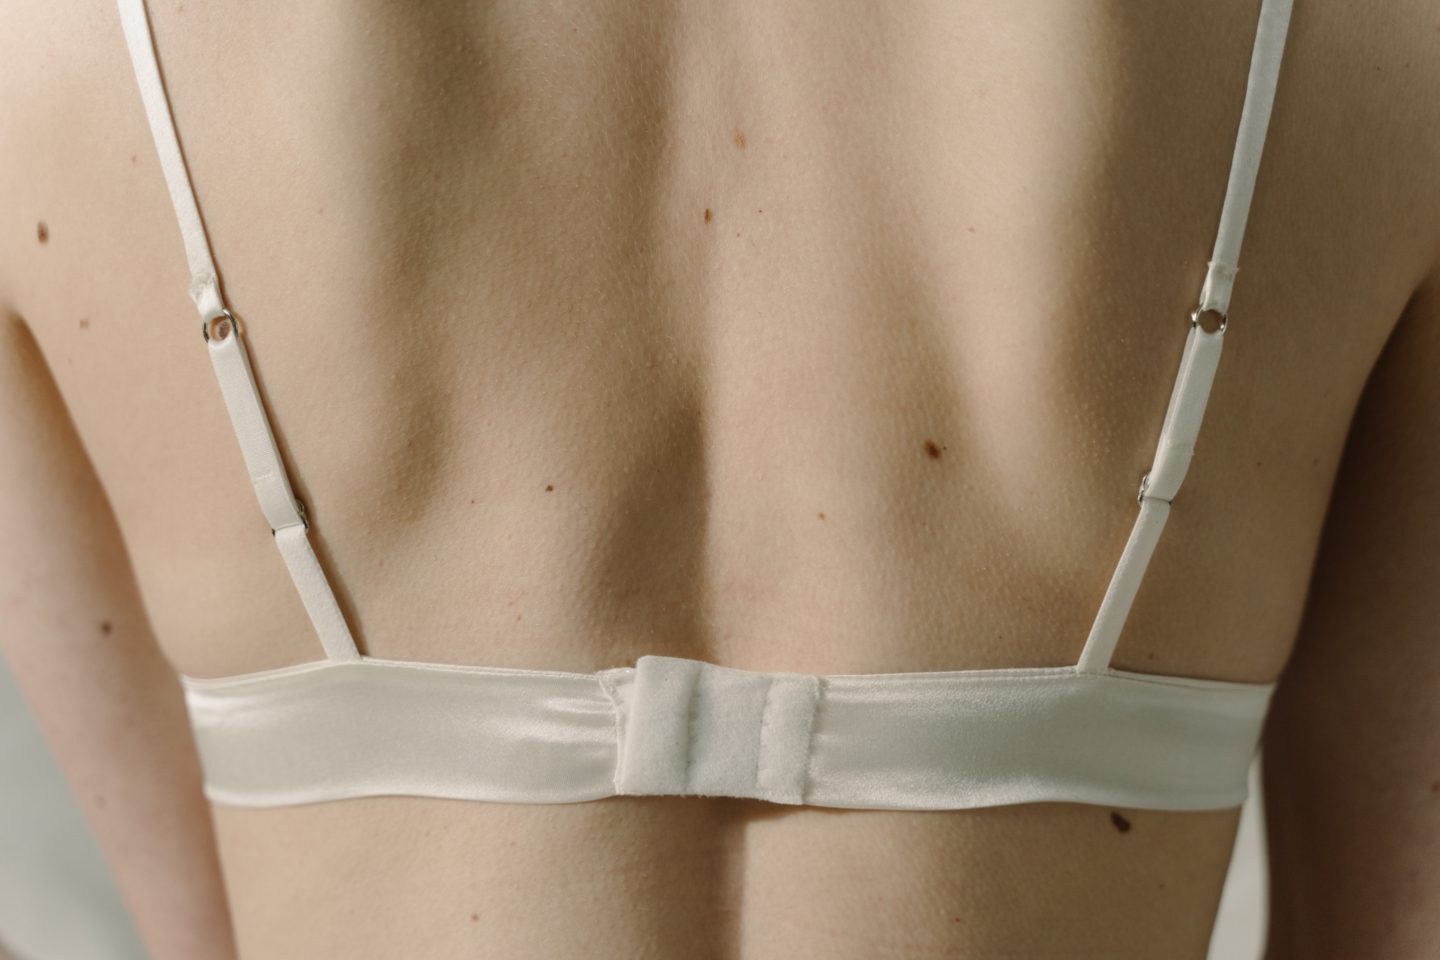 The Bra Recycling Programs That You Need to Know About